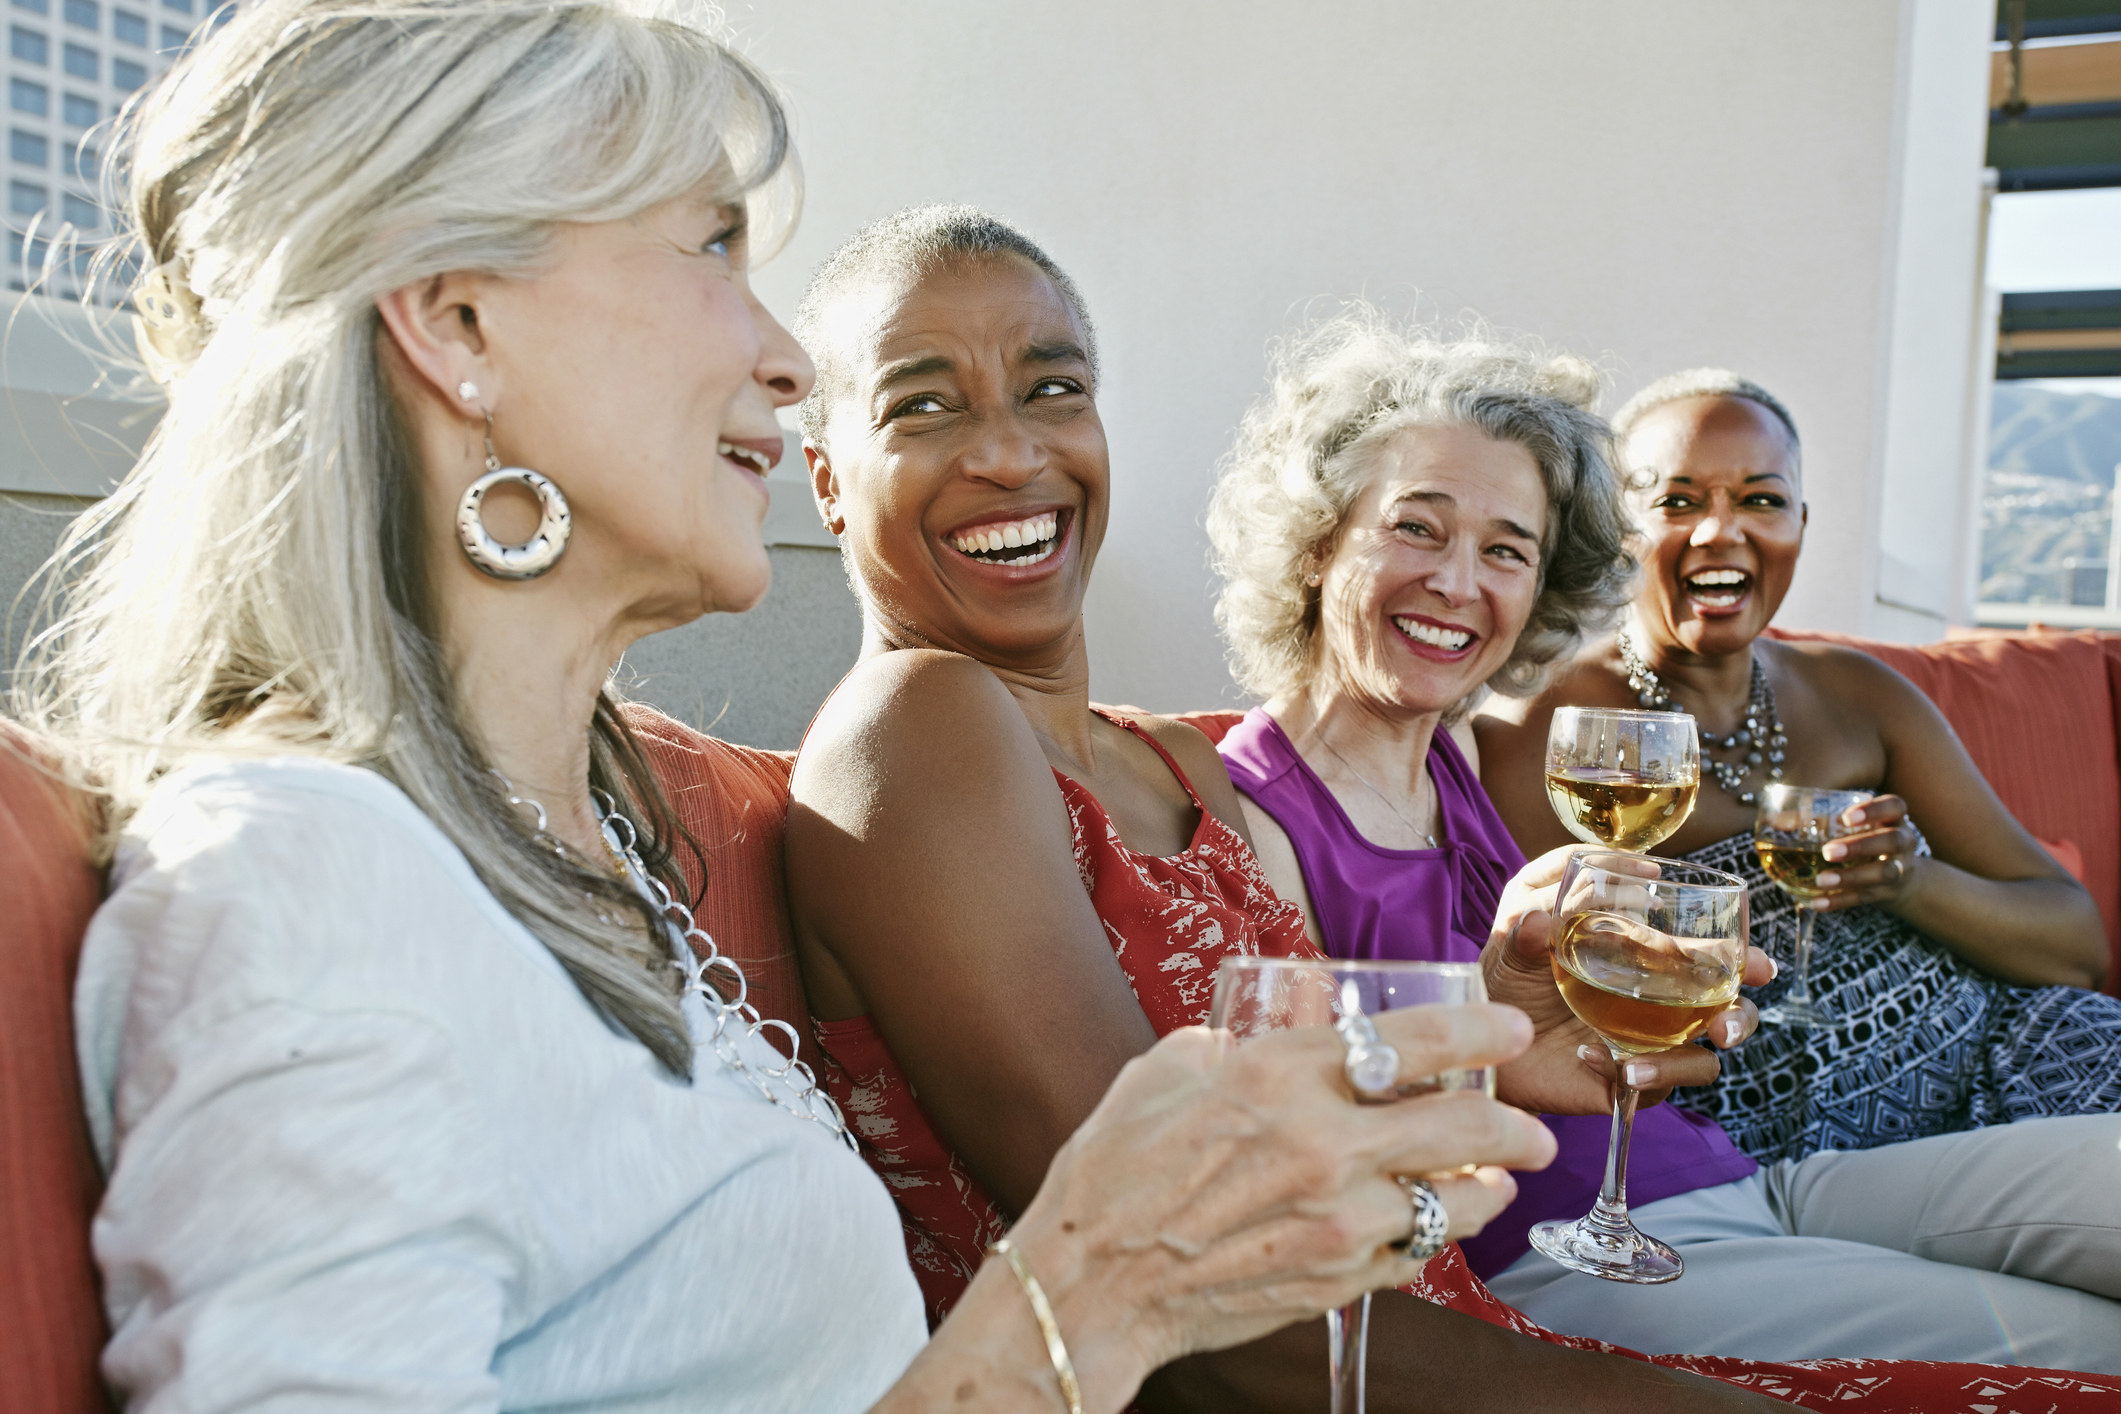 A group of women drinking wine together